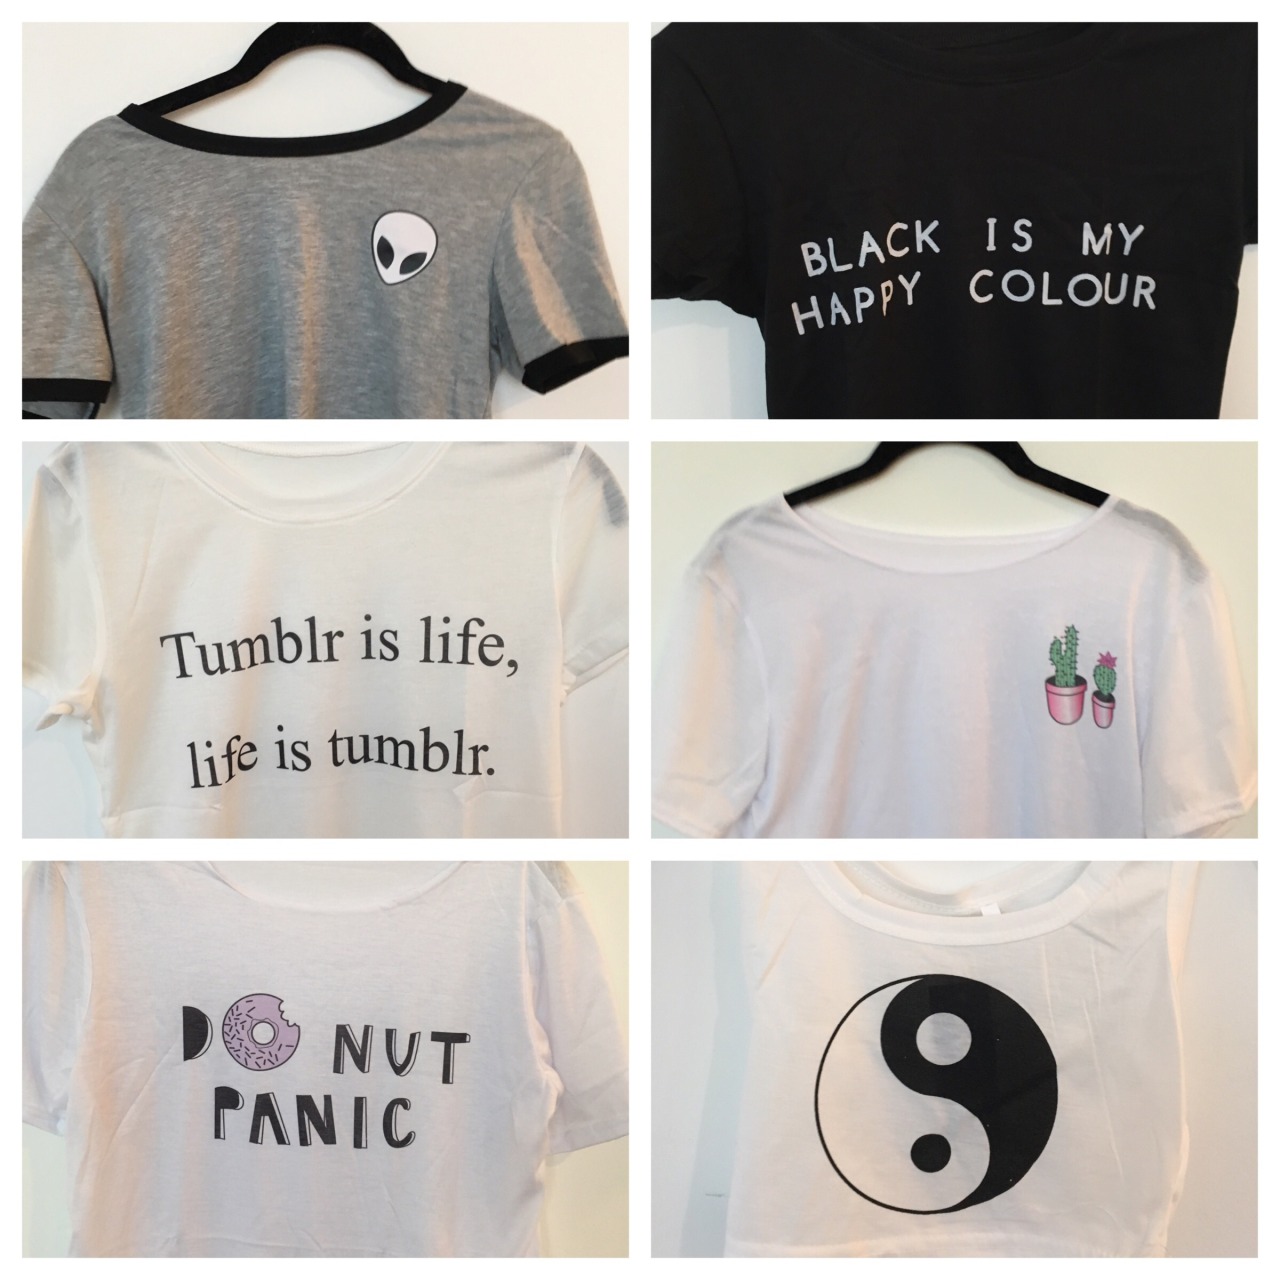 ameliastardust:
“ ameliastardust:
“ ameliastardust:
“ So I just added a bunch of new shirts, necklaces, and stickers to my store and you can find them here!
Also, you can use the code TUMBLR for 15% off and A FREE GIFT!
I get a lot of you guys...